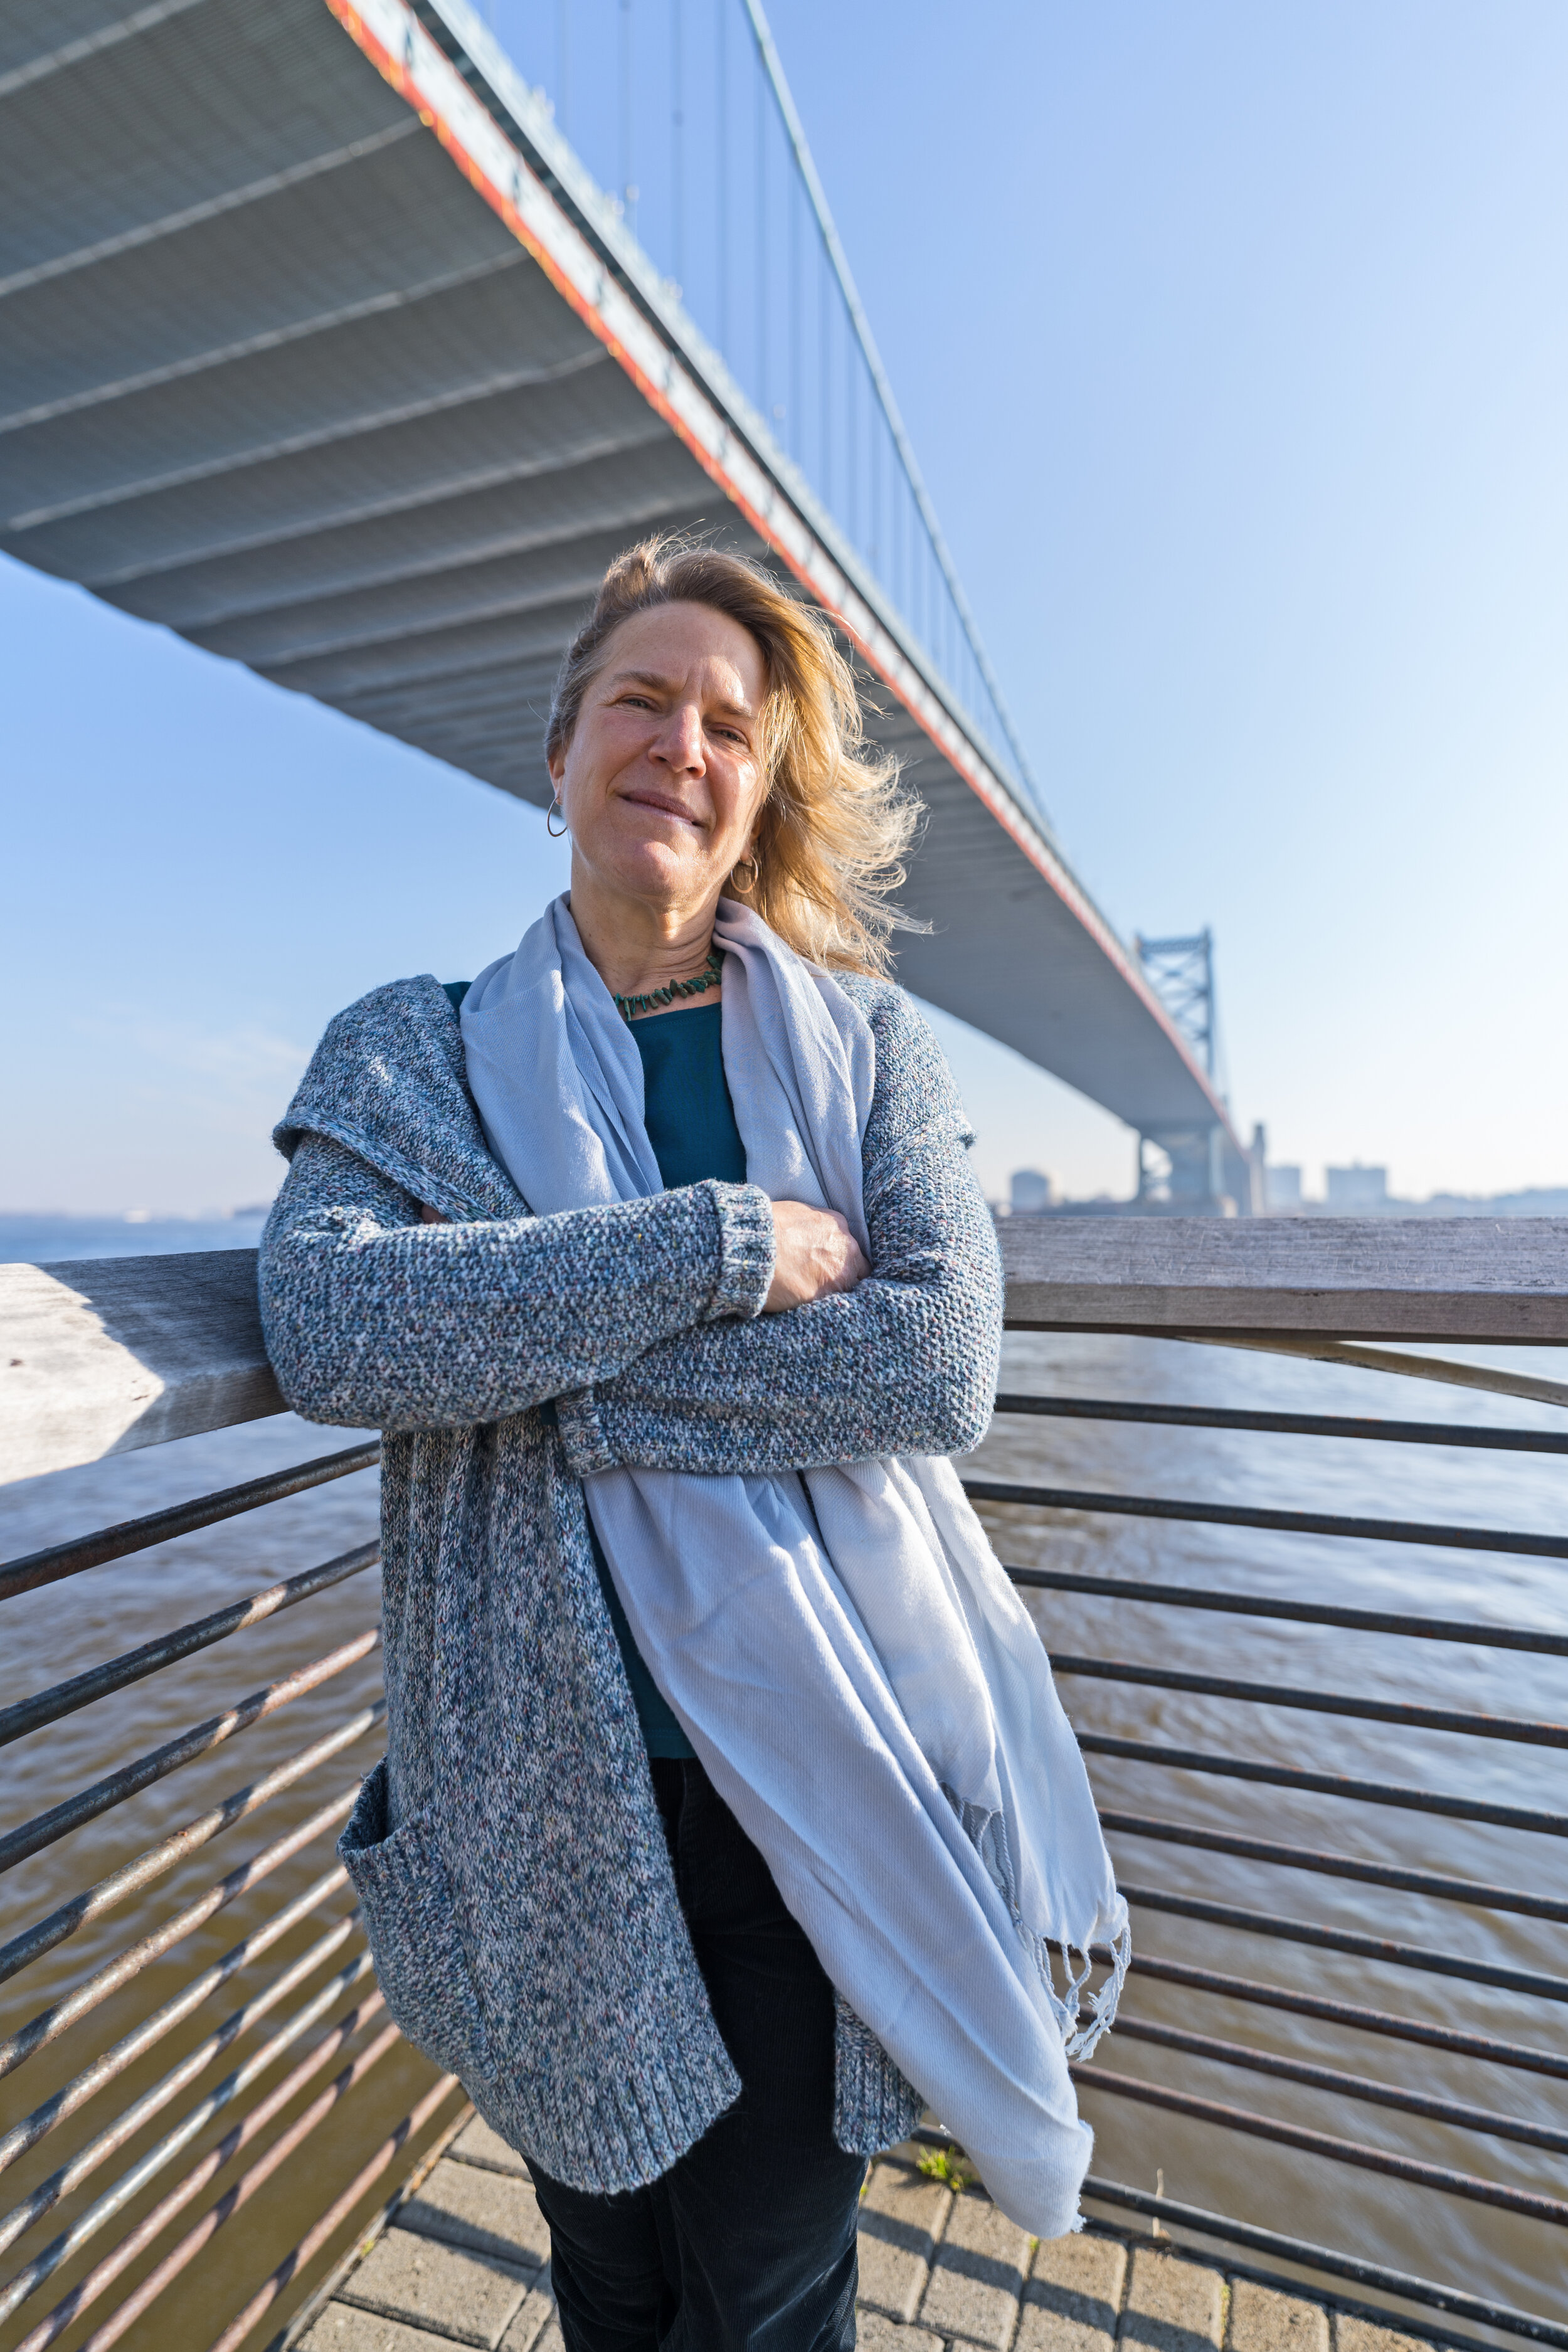 Delaware Riverkeeper Maya van Rossum stands beside the Delaware River.&nbsp; She has been a watershed advocate for over 25 years.Photography by Drew Dennis.